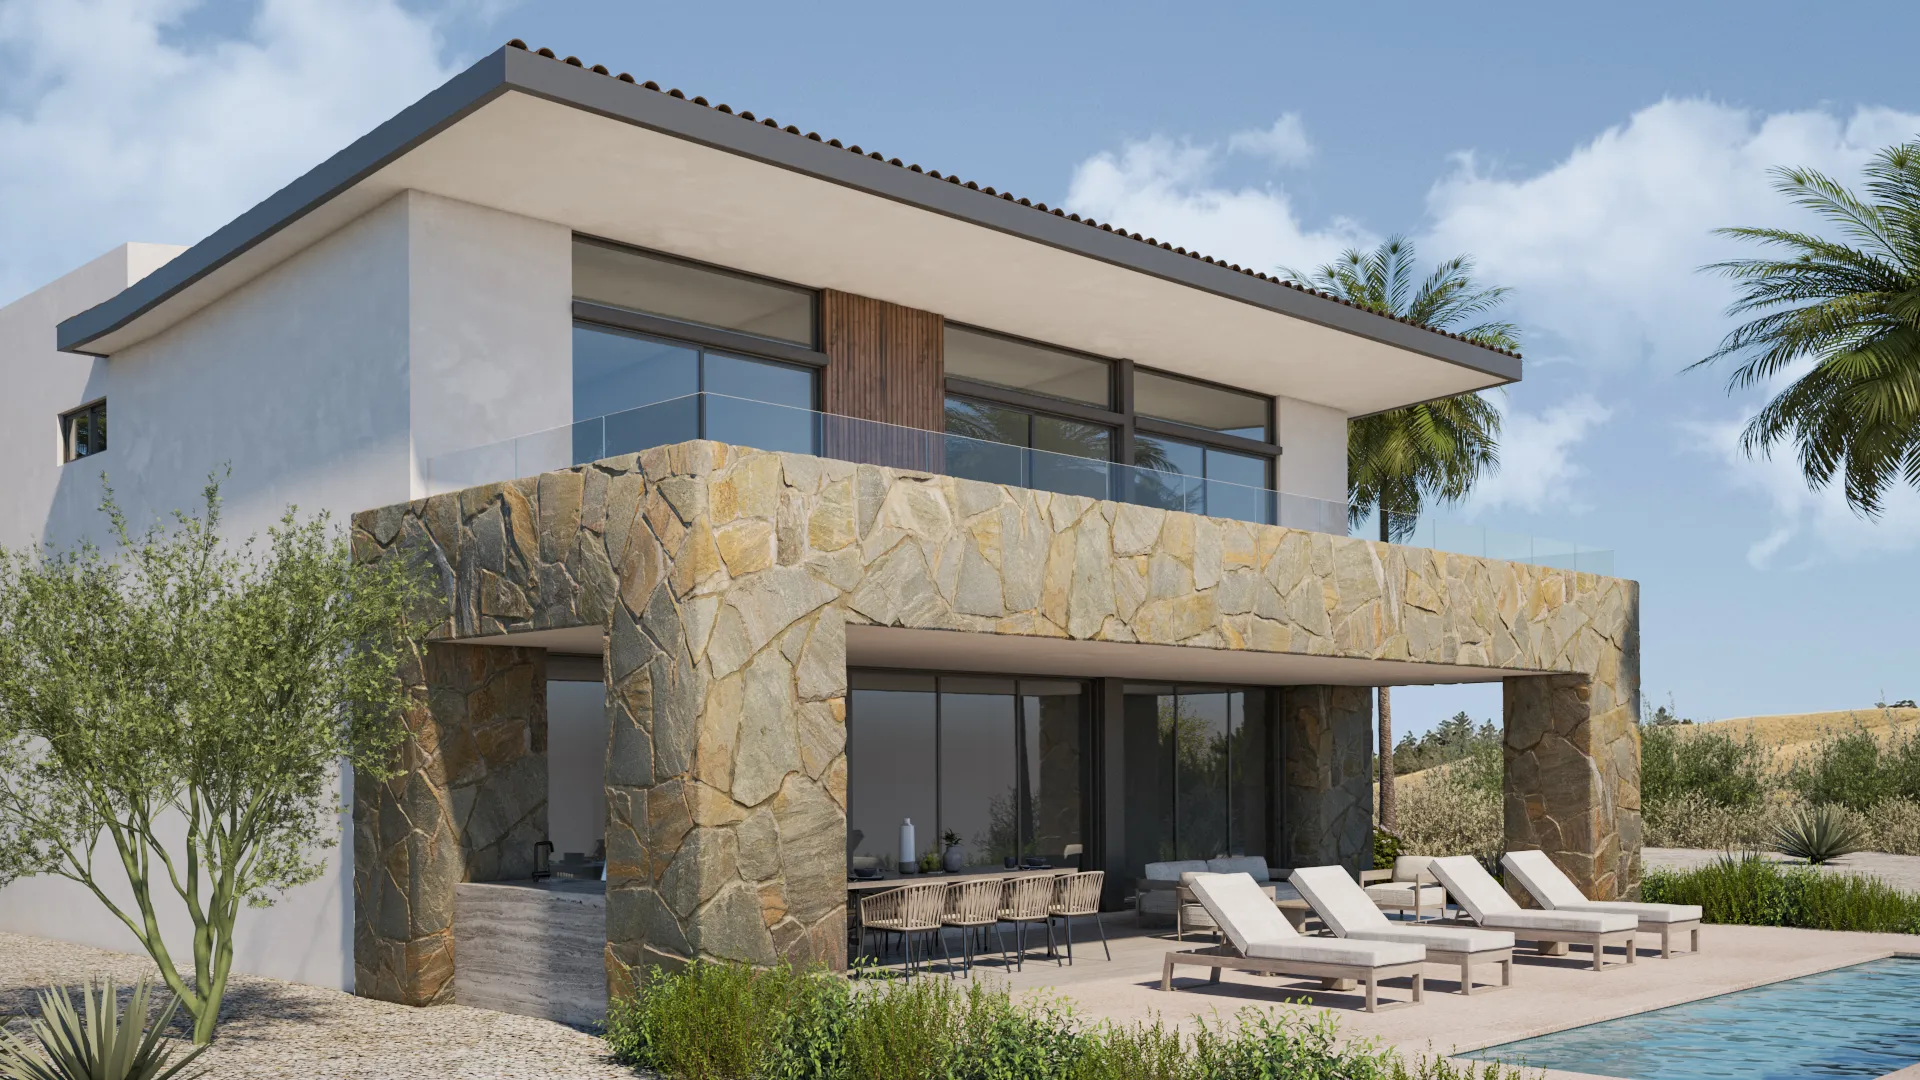 This spectacular residence has indoor-outdoor living spaces ranging from over 5,506 square feet to over 8,449 square feet over two-stories. This residence include an 91.9 sq. ft. casita with ocean views that can be converted to an additional guest suite.